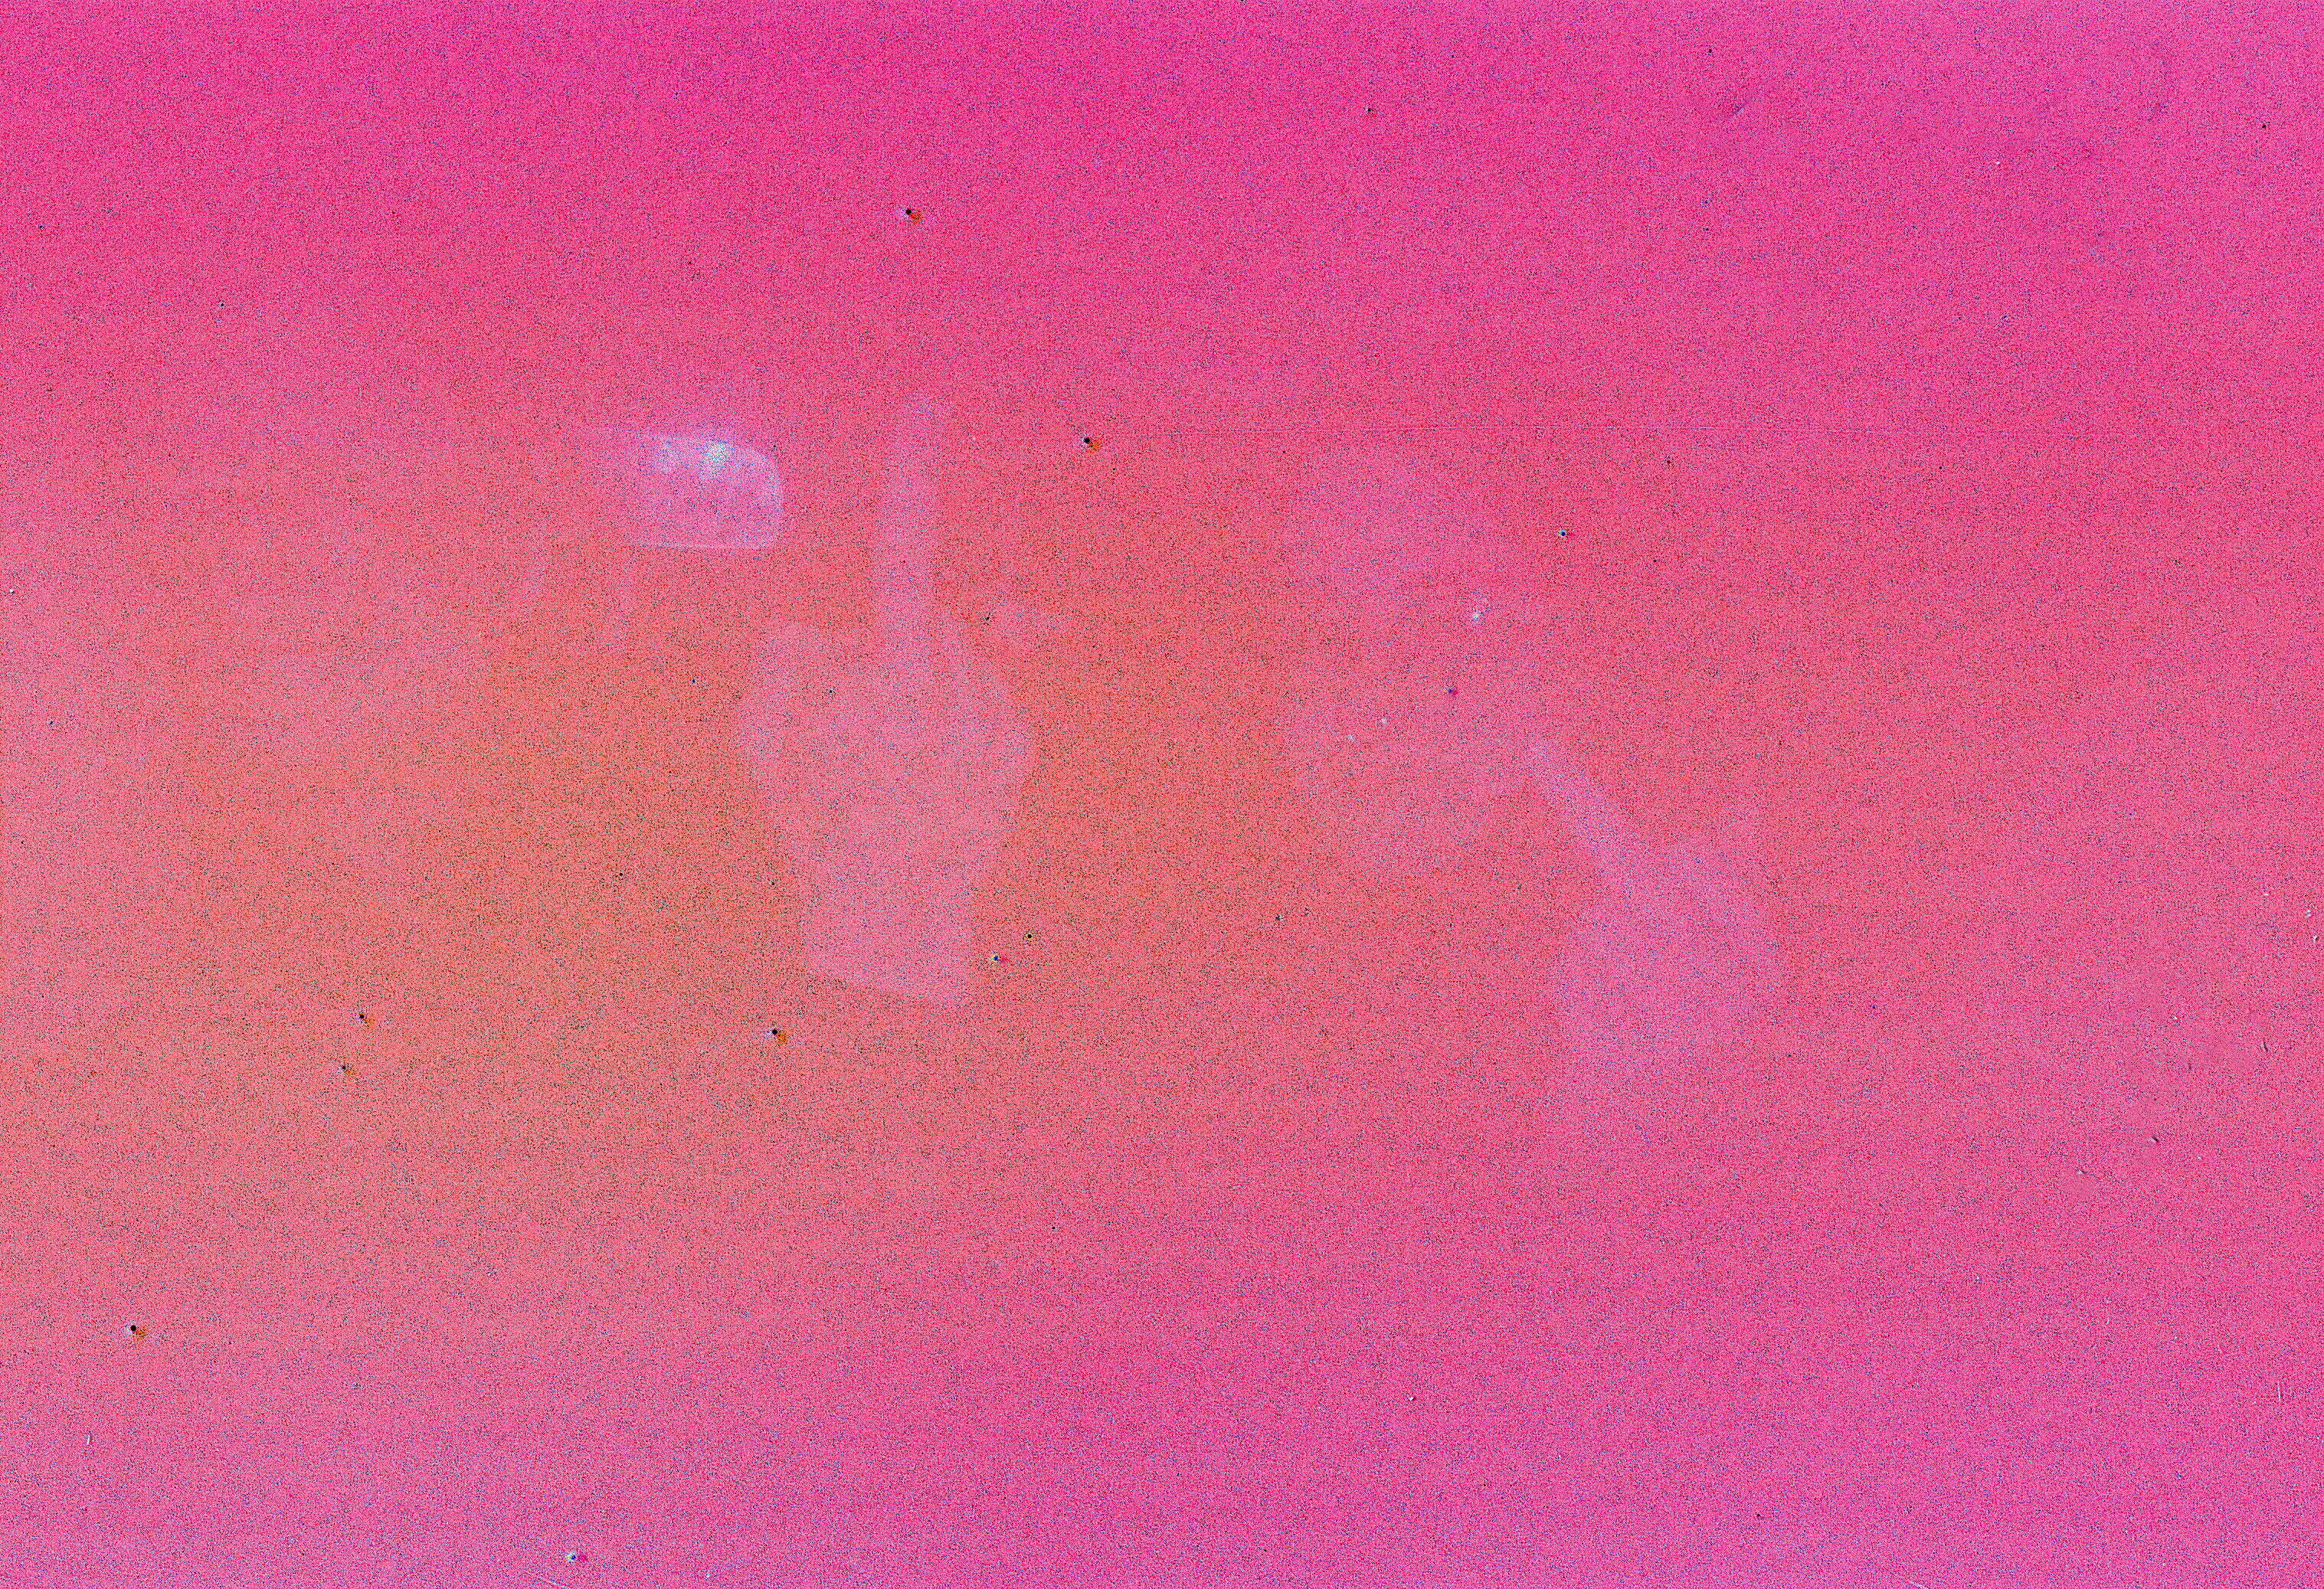 Very pink, foggy photo where two hands flipping the camera off from the front seat of a car are barely visible.